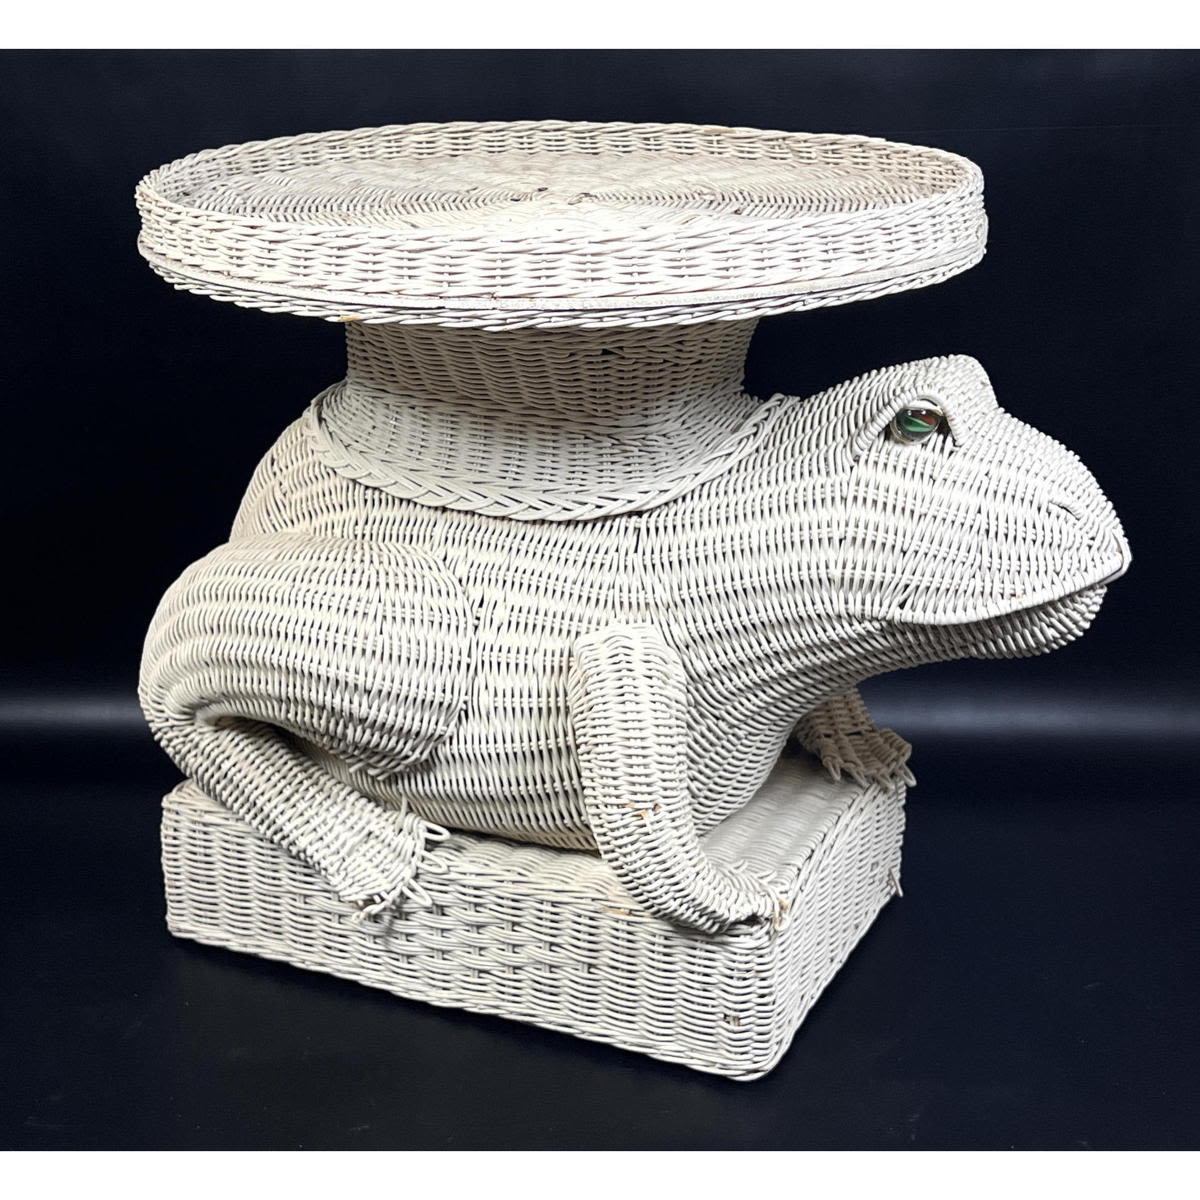 Woven Wicker Figural Frog Table.